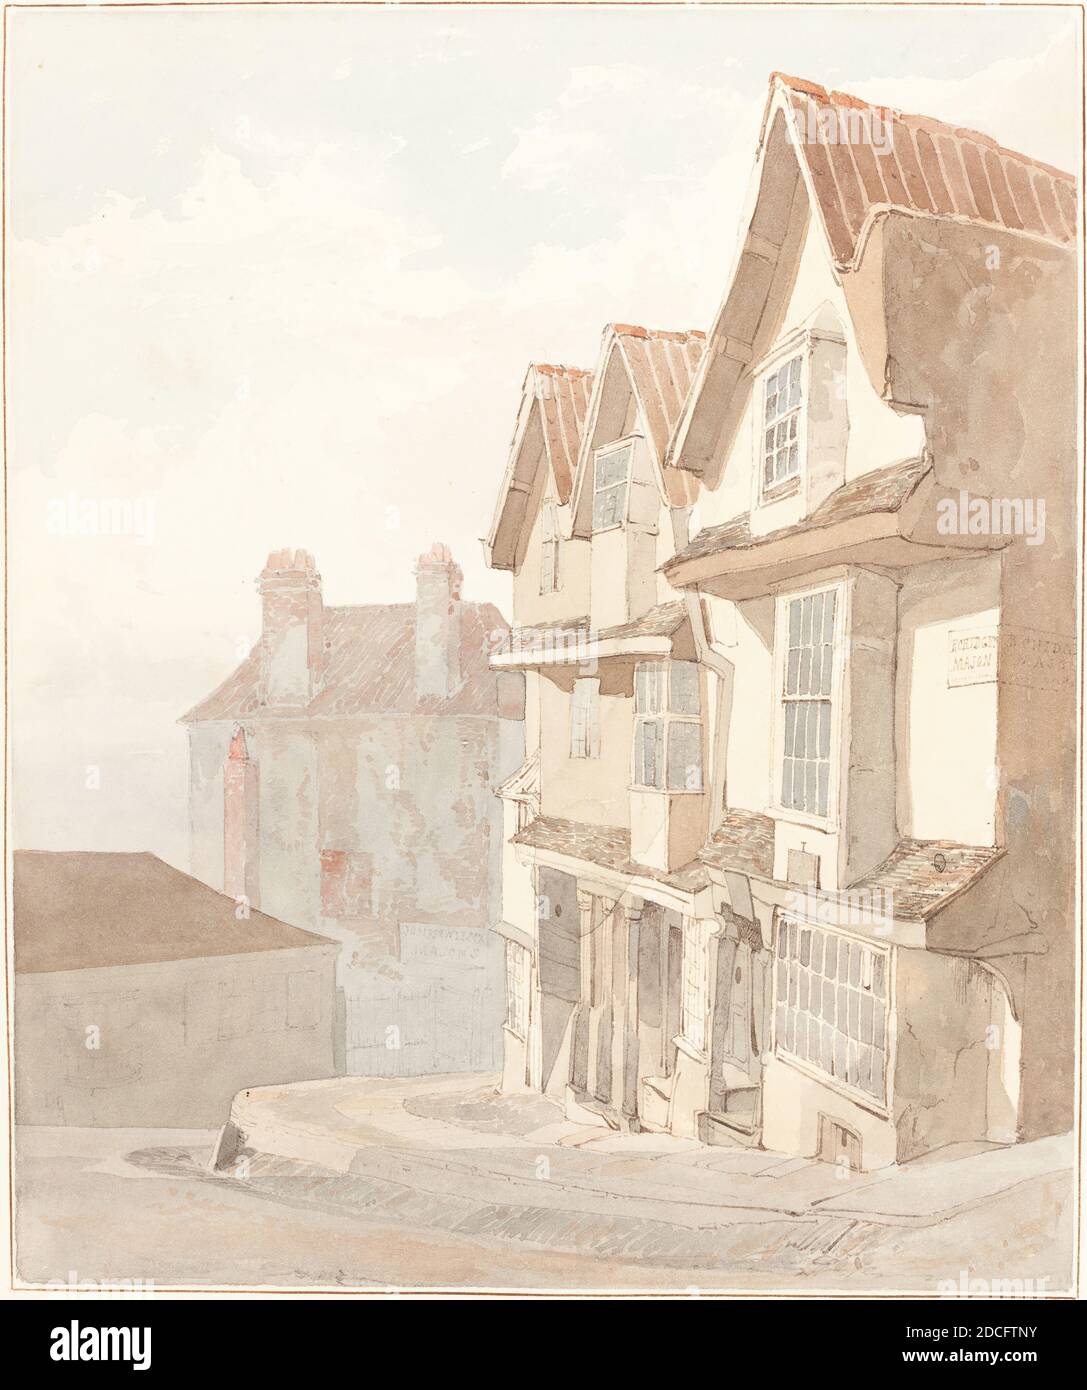 Robert Dixon, (artist), British, 1780 - 1815, View of Church Lane, Bristol, 1820s/1830s, watercolor, Overall (approximate): 25.5 x 21.2 cm (10 1/16 x 8 3/8 in.), support: 43.4 x 34.2 cm (17 1/16 x 13 7/16 in Stock Photo